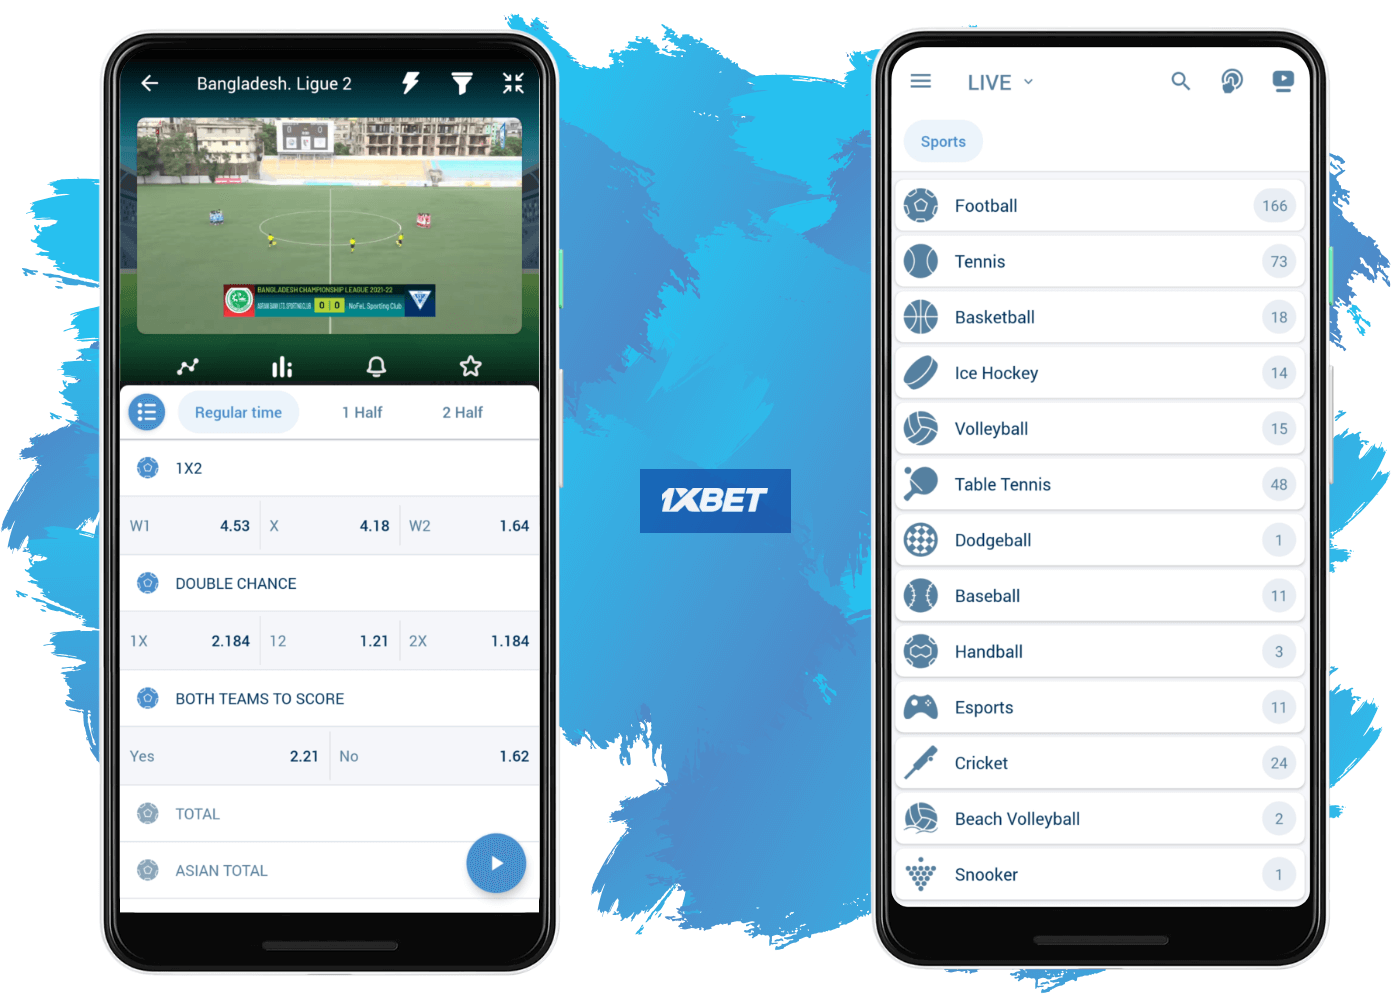 Strange Facts About Cockfight Betting App